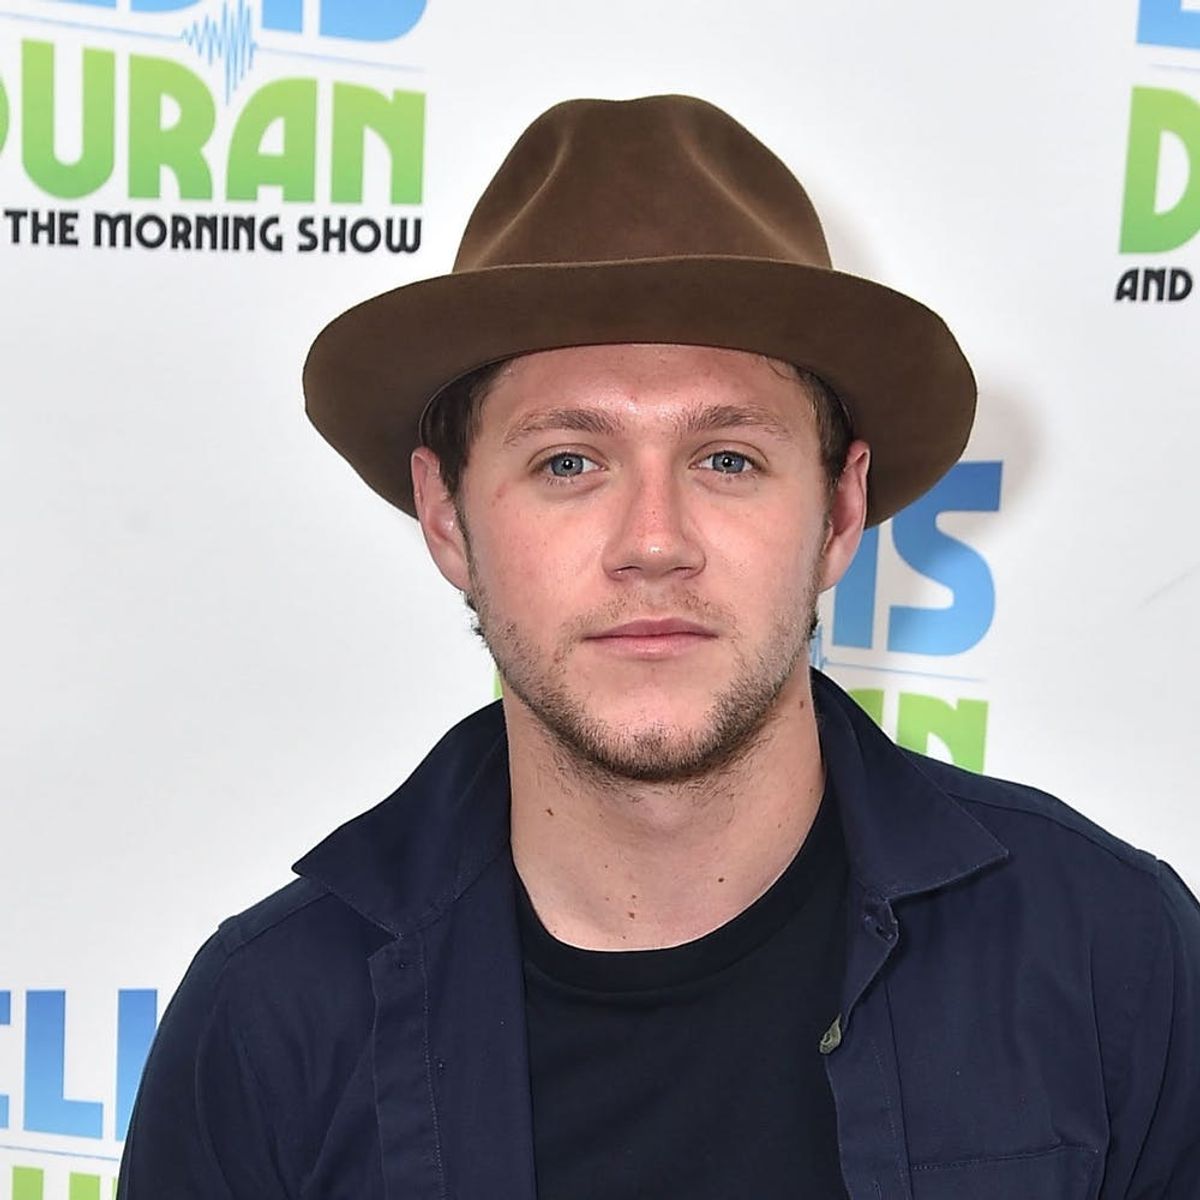 Niall Horan Is Taking Issue With Katy Perry’s Claims That He’s “Always Trying to Flirt With Her”